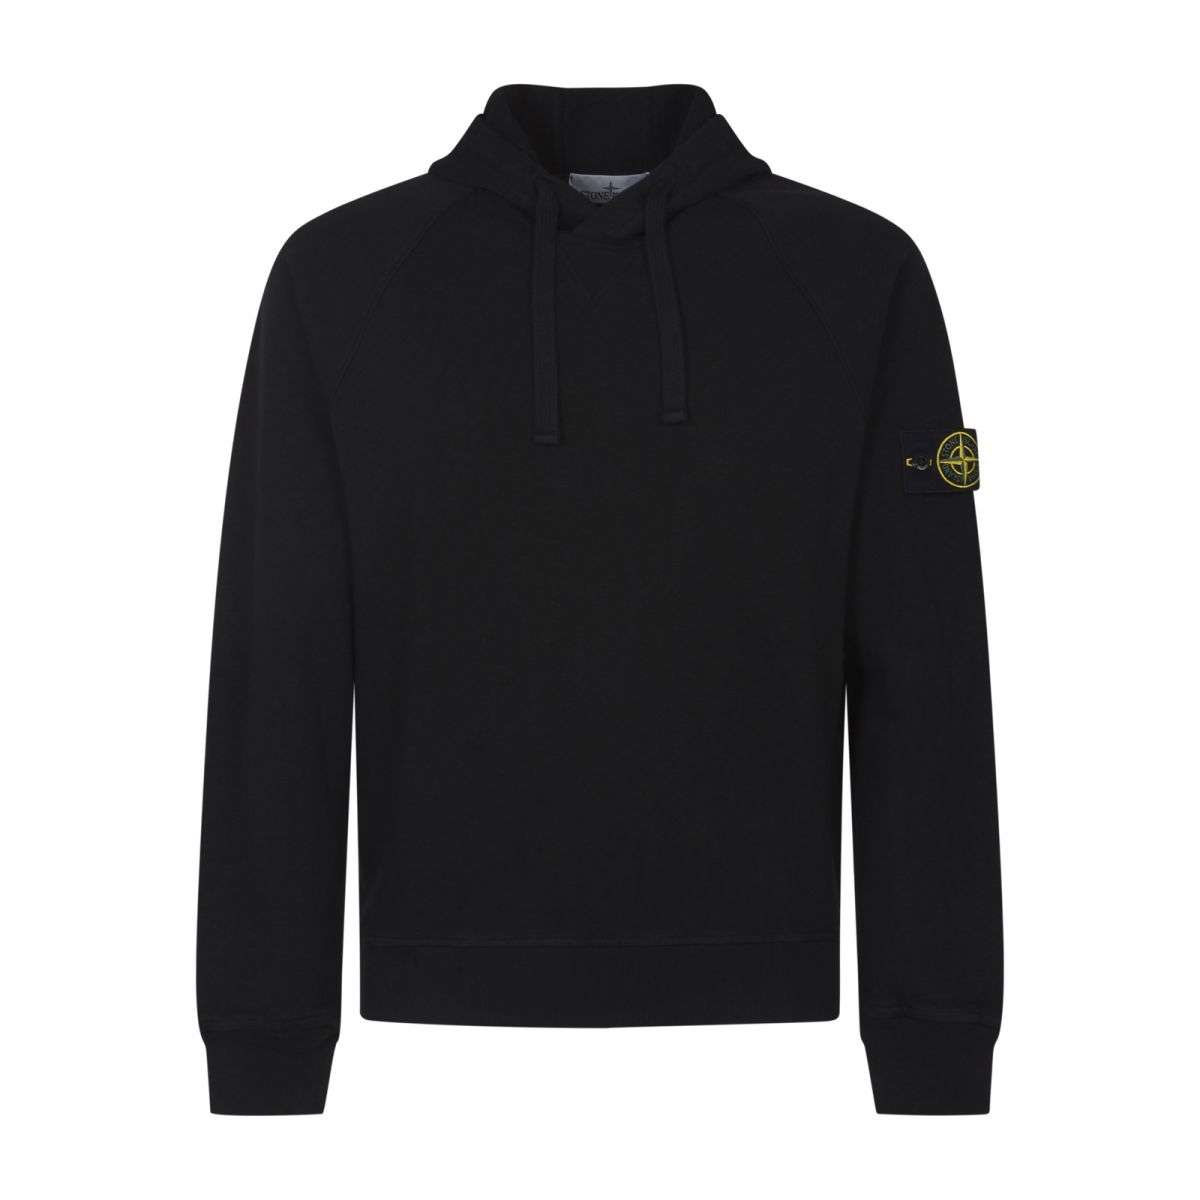 STONE ISLAND - Compass patch-detail hoodie